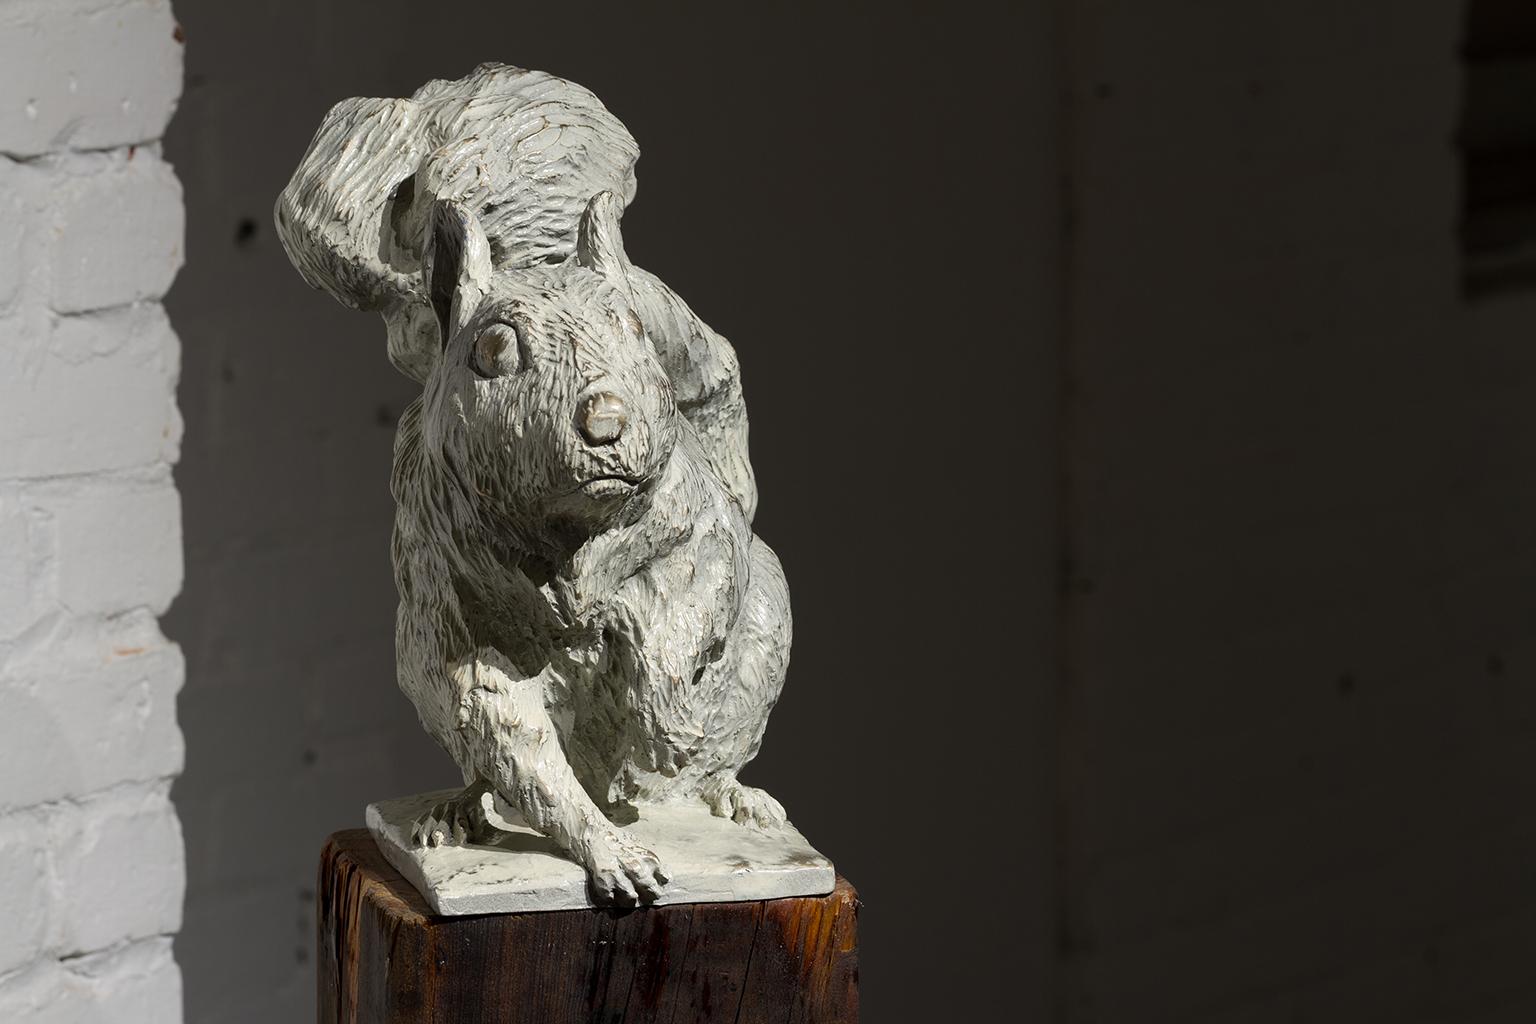 Model for Monument to the White Squirrel - Sculpture by Brandon Vickerd